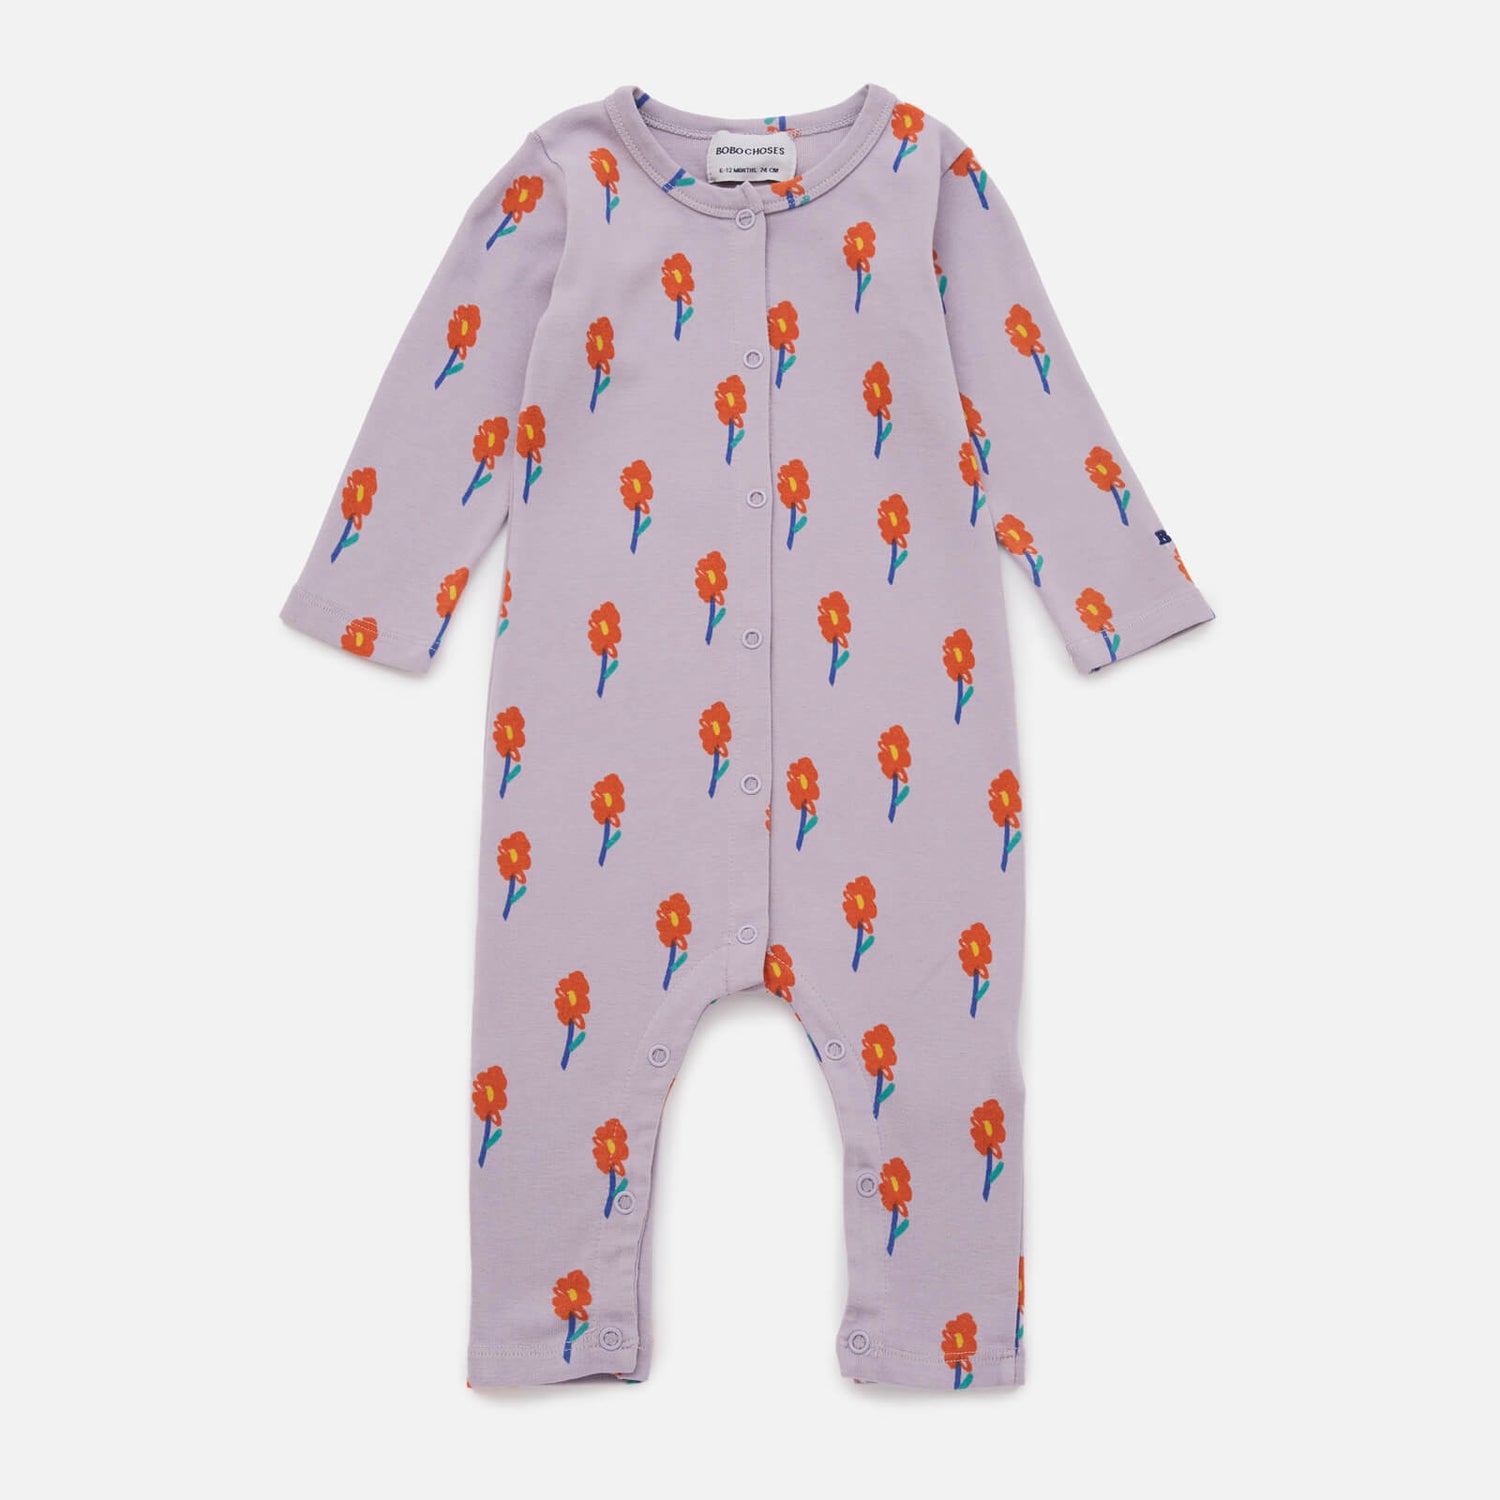 BoBo Choses Baby's Floral Print Babygrow - 3-6 months